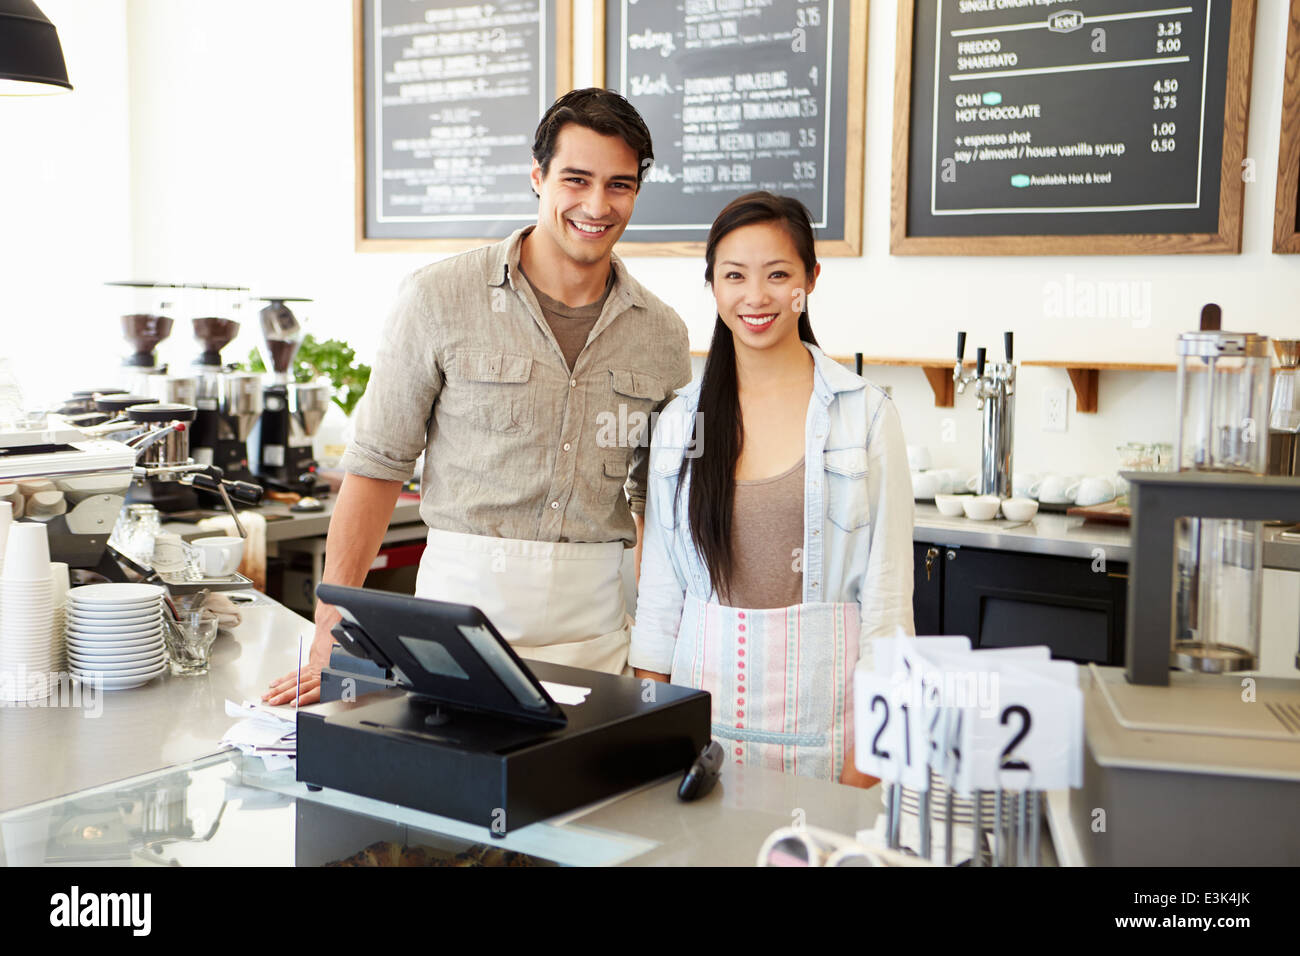 Male And Female Staff In Coffee Shop Stock Photo